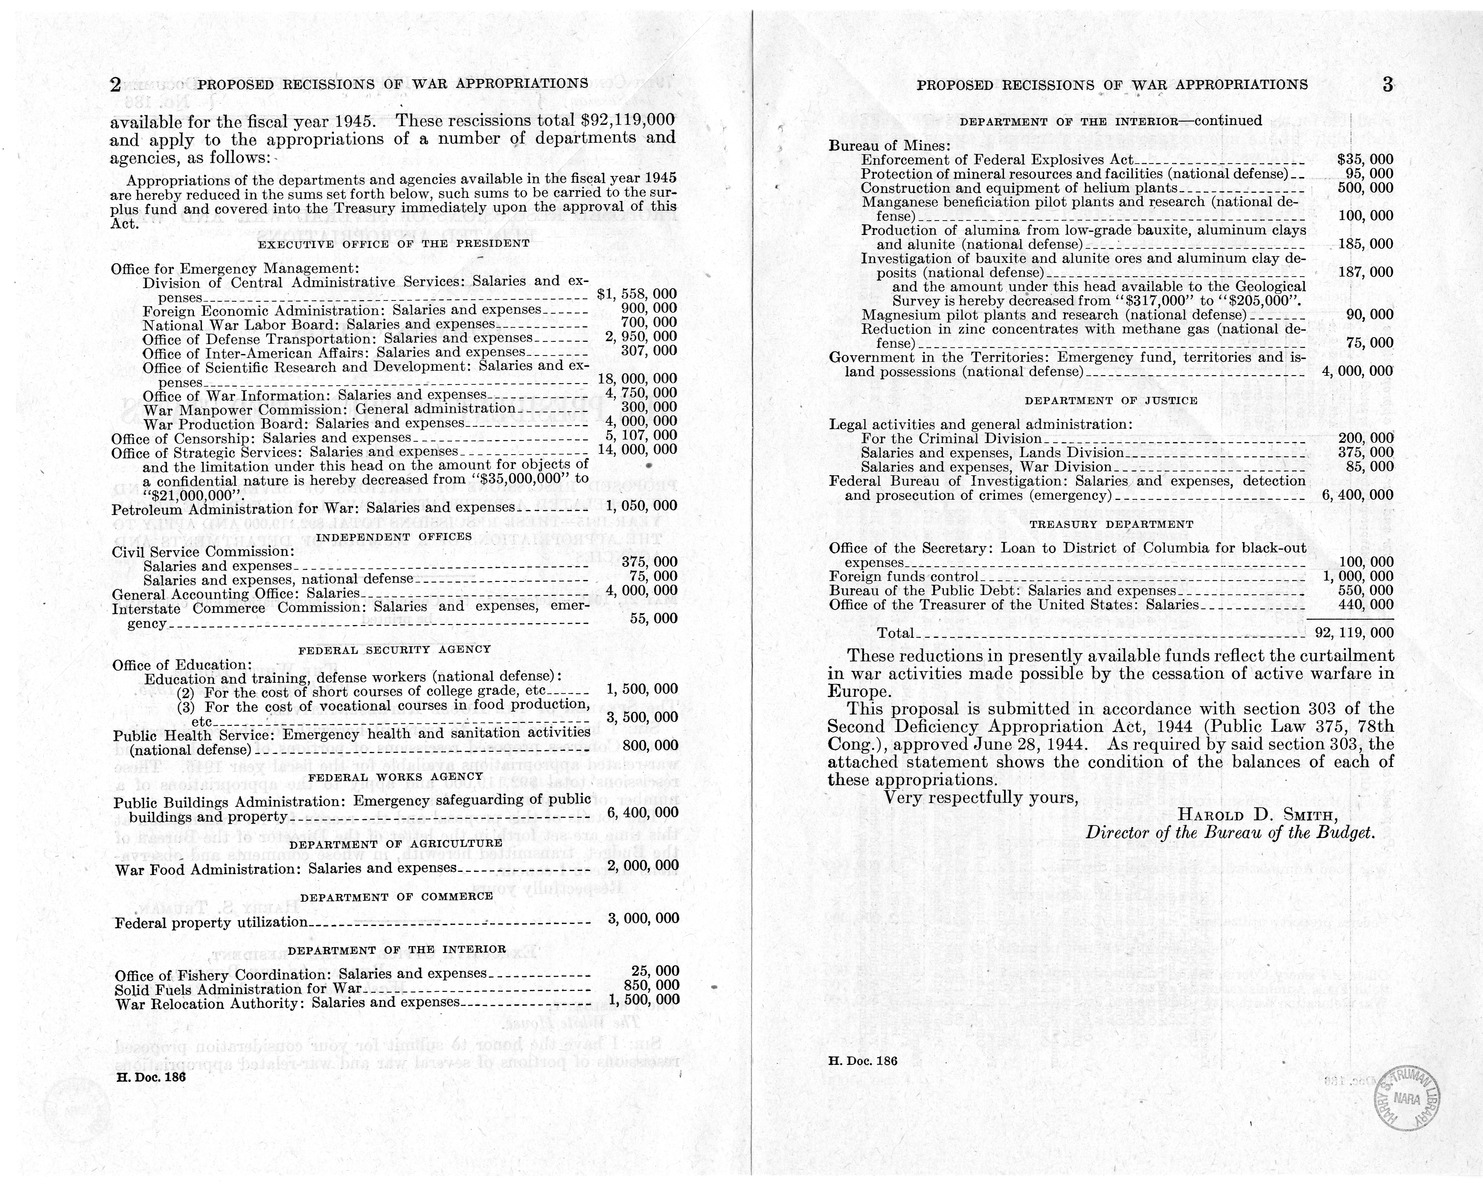 Memorandum from Harold D. Smith to M. C. Latta, H.J. Res. 202, Reducing Certain Appropriations Available in the Fiscal Year Ending June 30, 1945, with Attachments